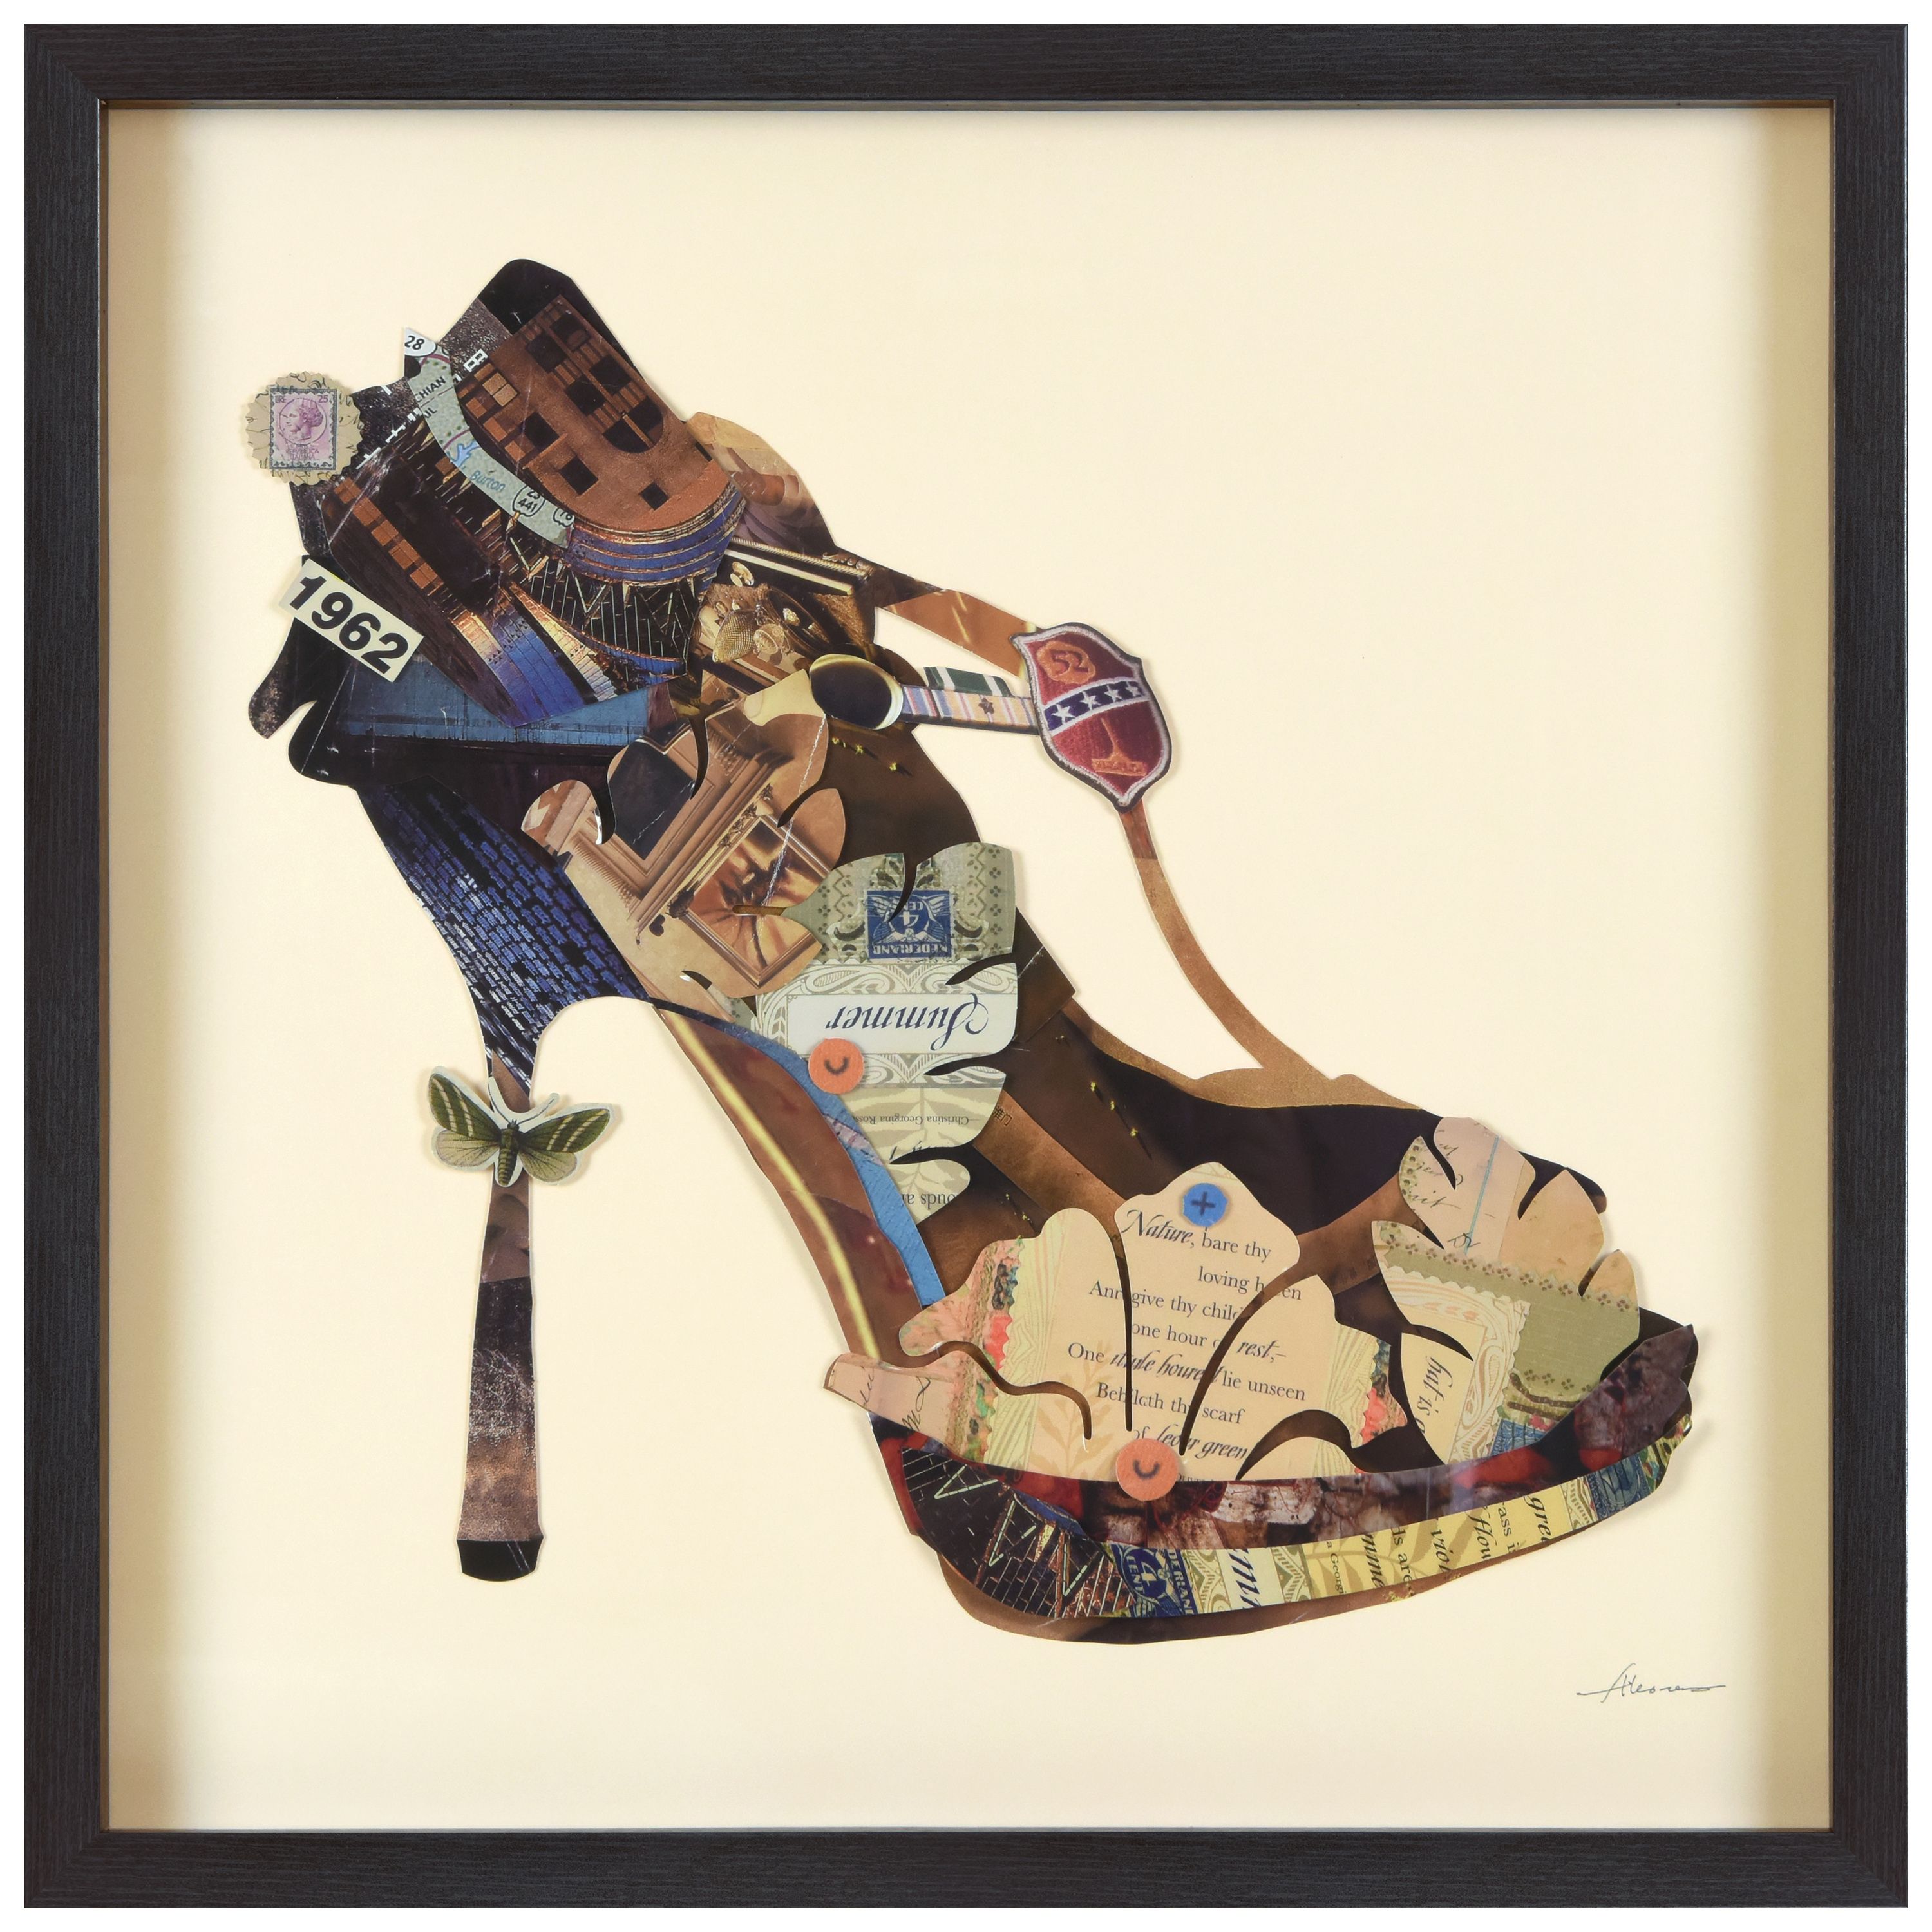 High Heeled - Dimensional Art Collage Hand Signed By Alex Zeng Framed Graphic Wall Art